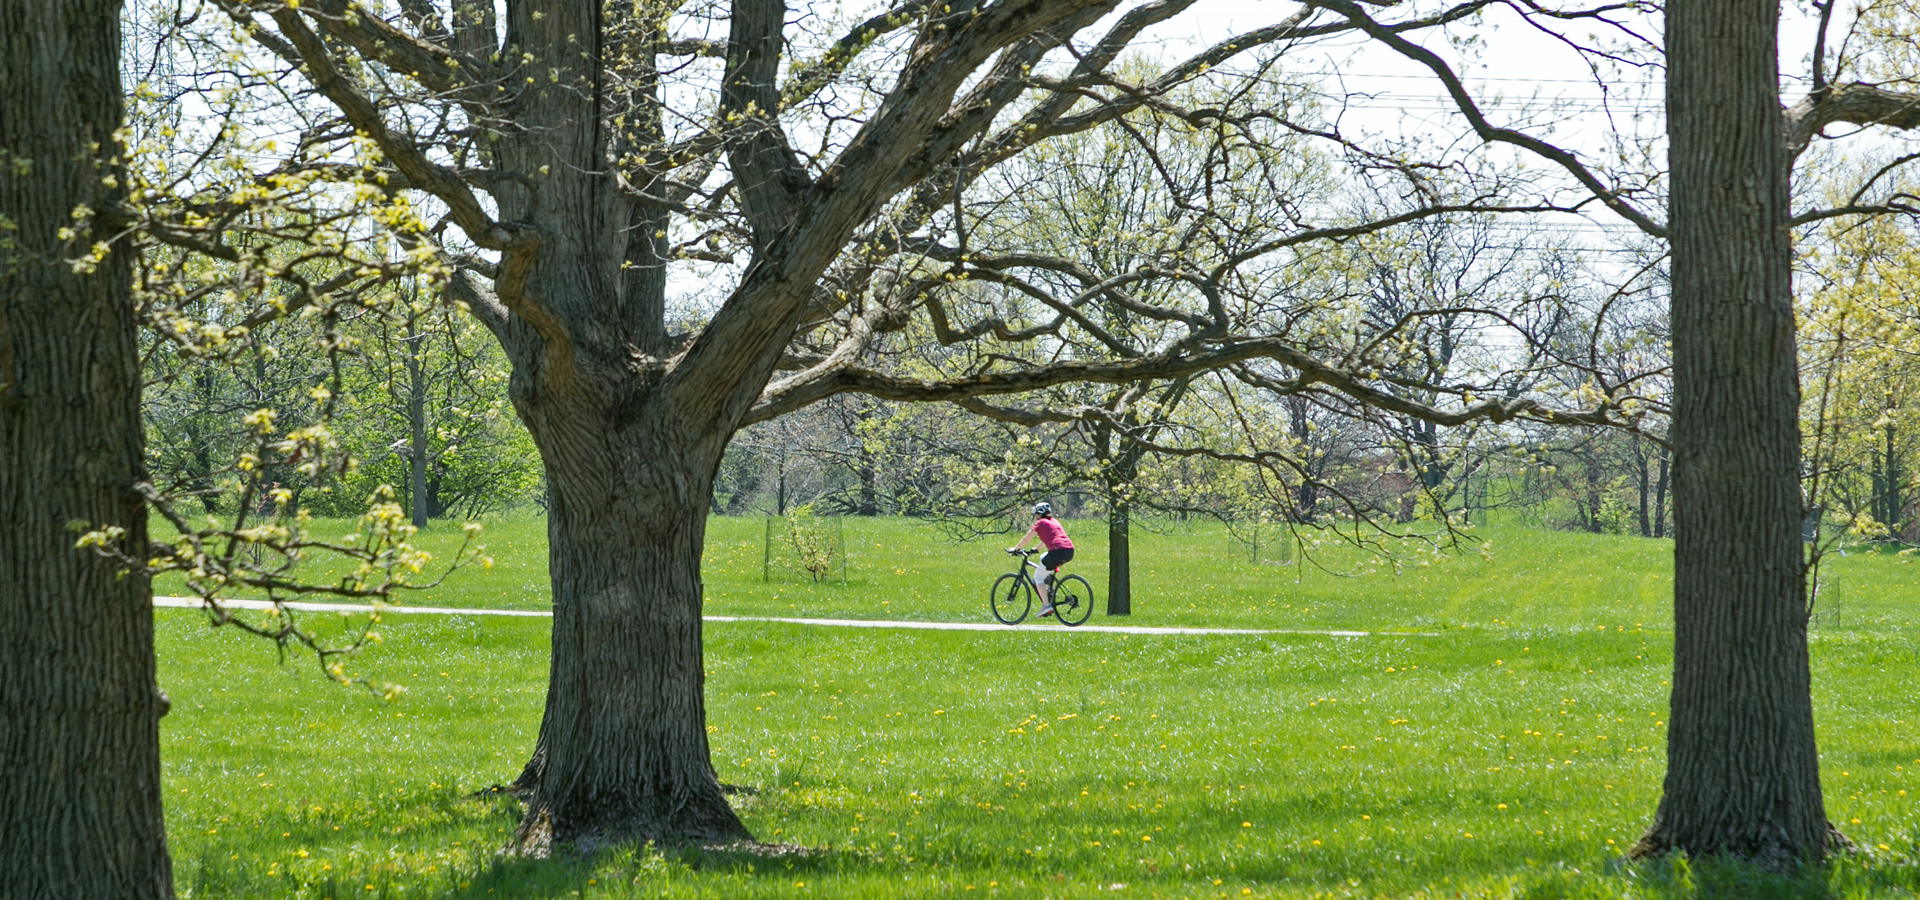 Guest bikes through the oak collection in spring